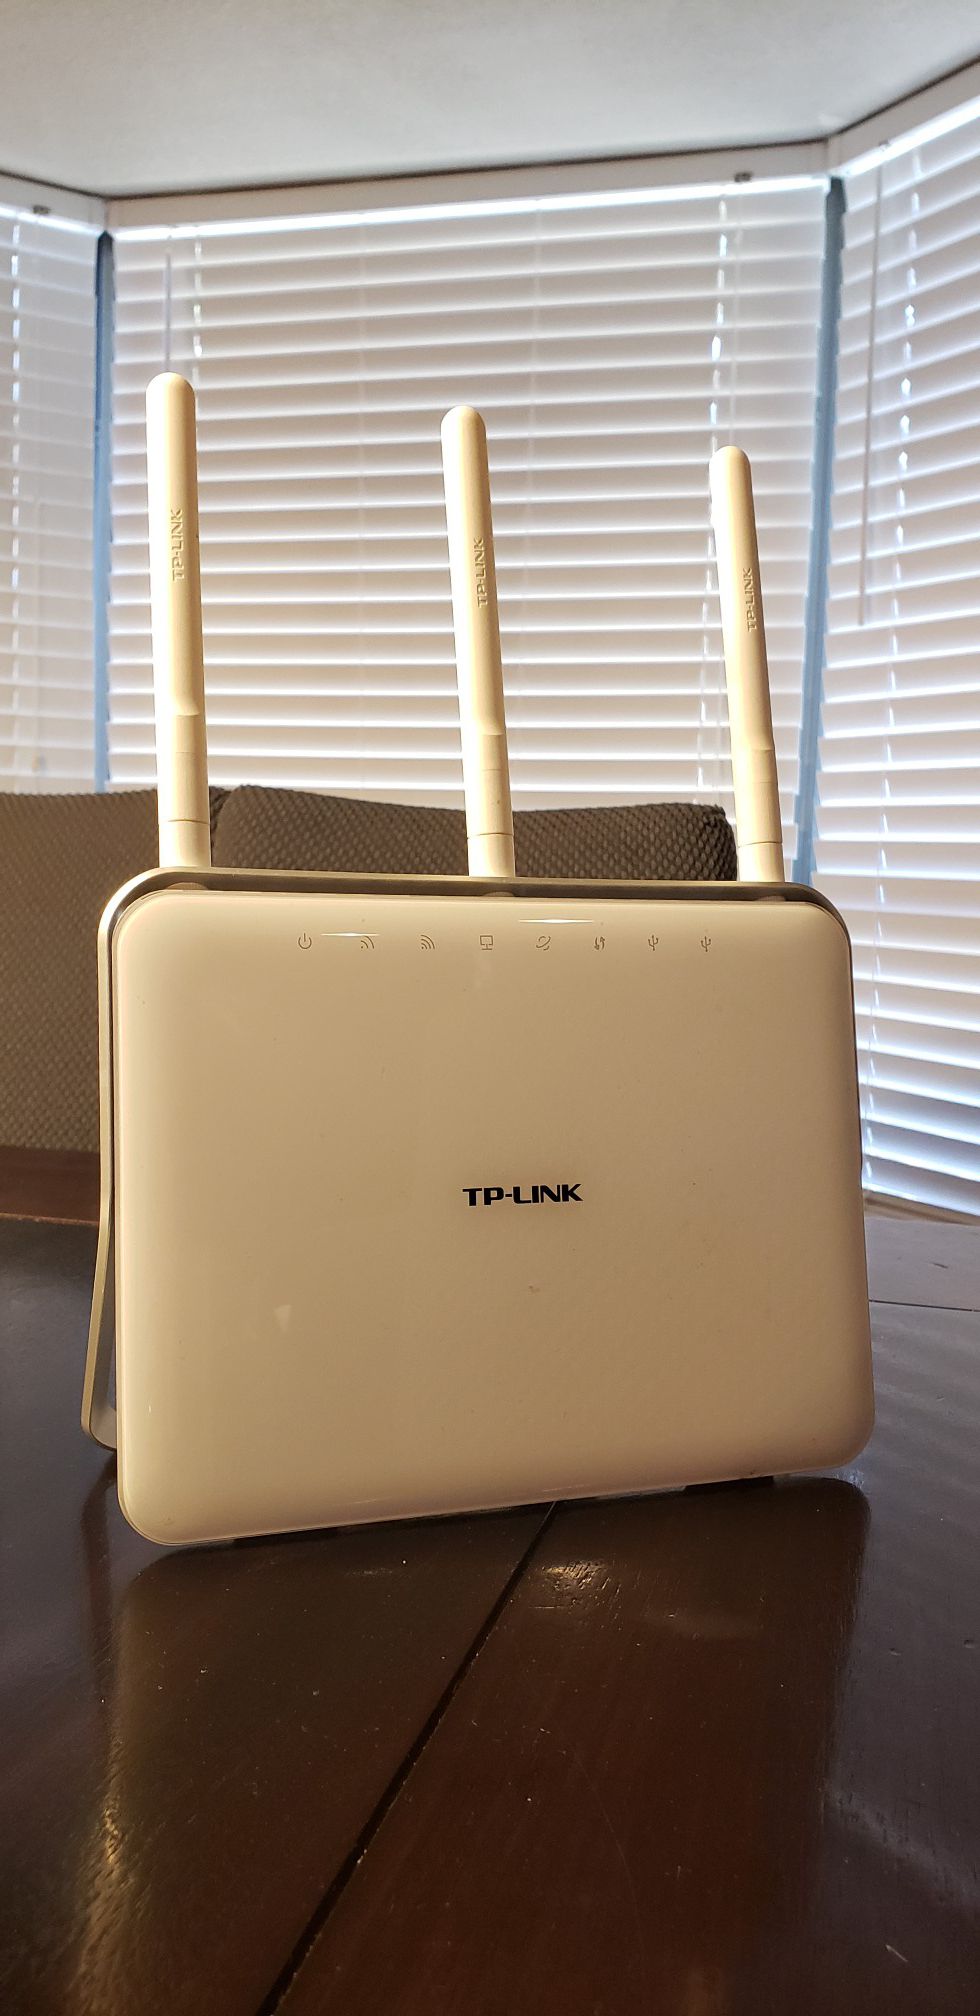 Wi-Fi router modem extenders